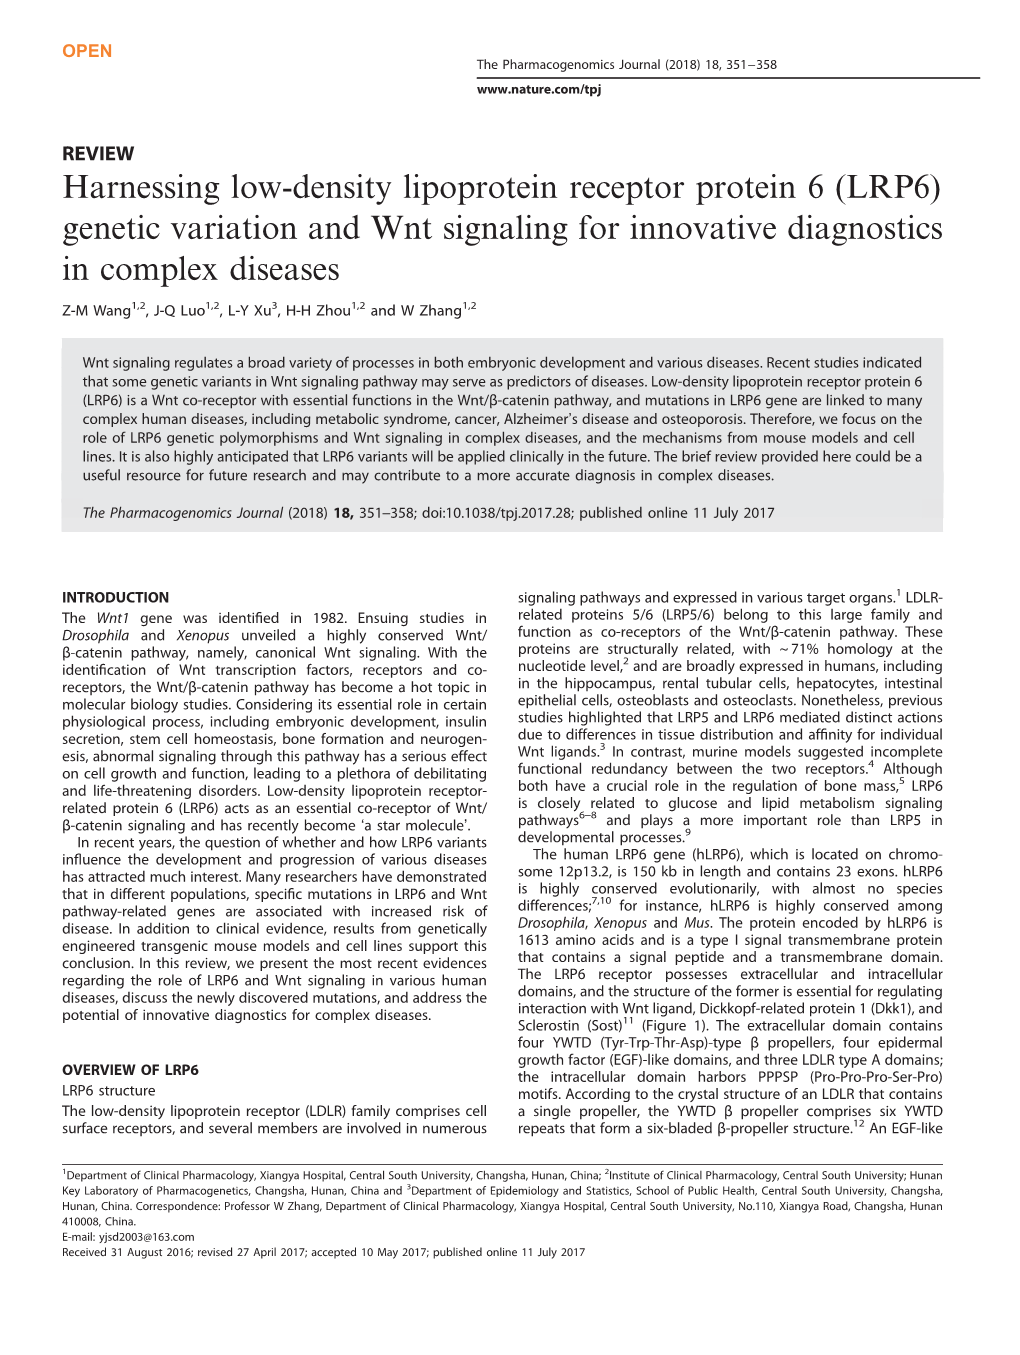 Harnessing Low-Density Lipoprotein Receptor Protein 6 (LRP6) Genetic Variation and Wnt Signaling for Innovative Diagnostics in Complex Diseases